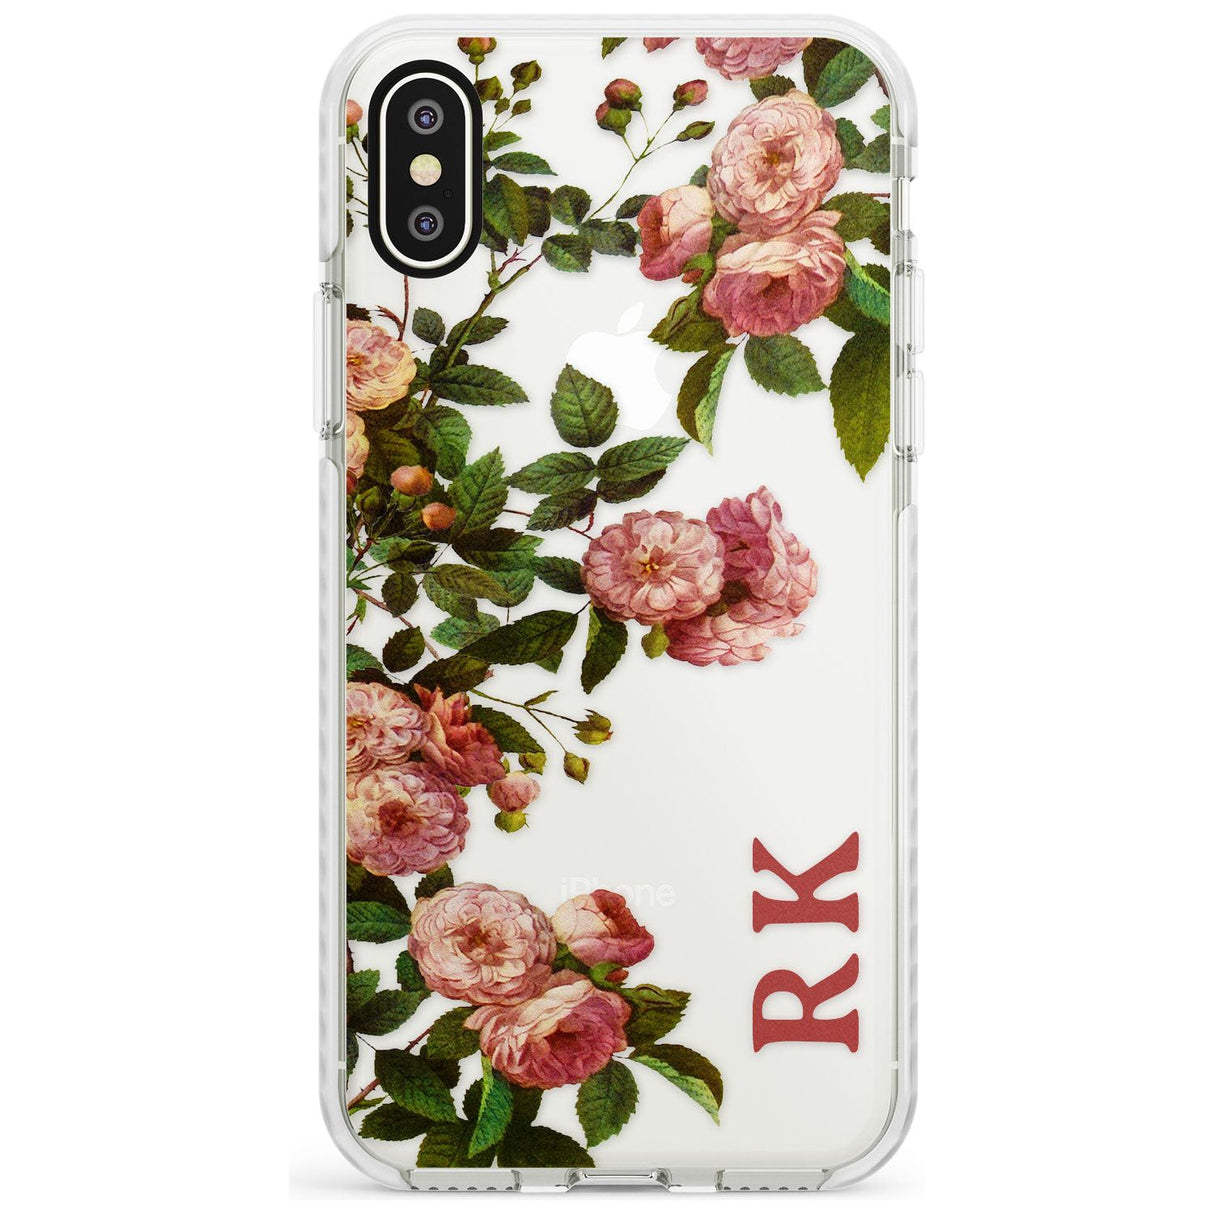 Custom Clear Vintage Floral Pink Garden Roses Impact Phone Case for iPhone X XS Max XR